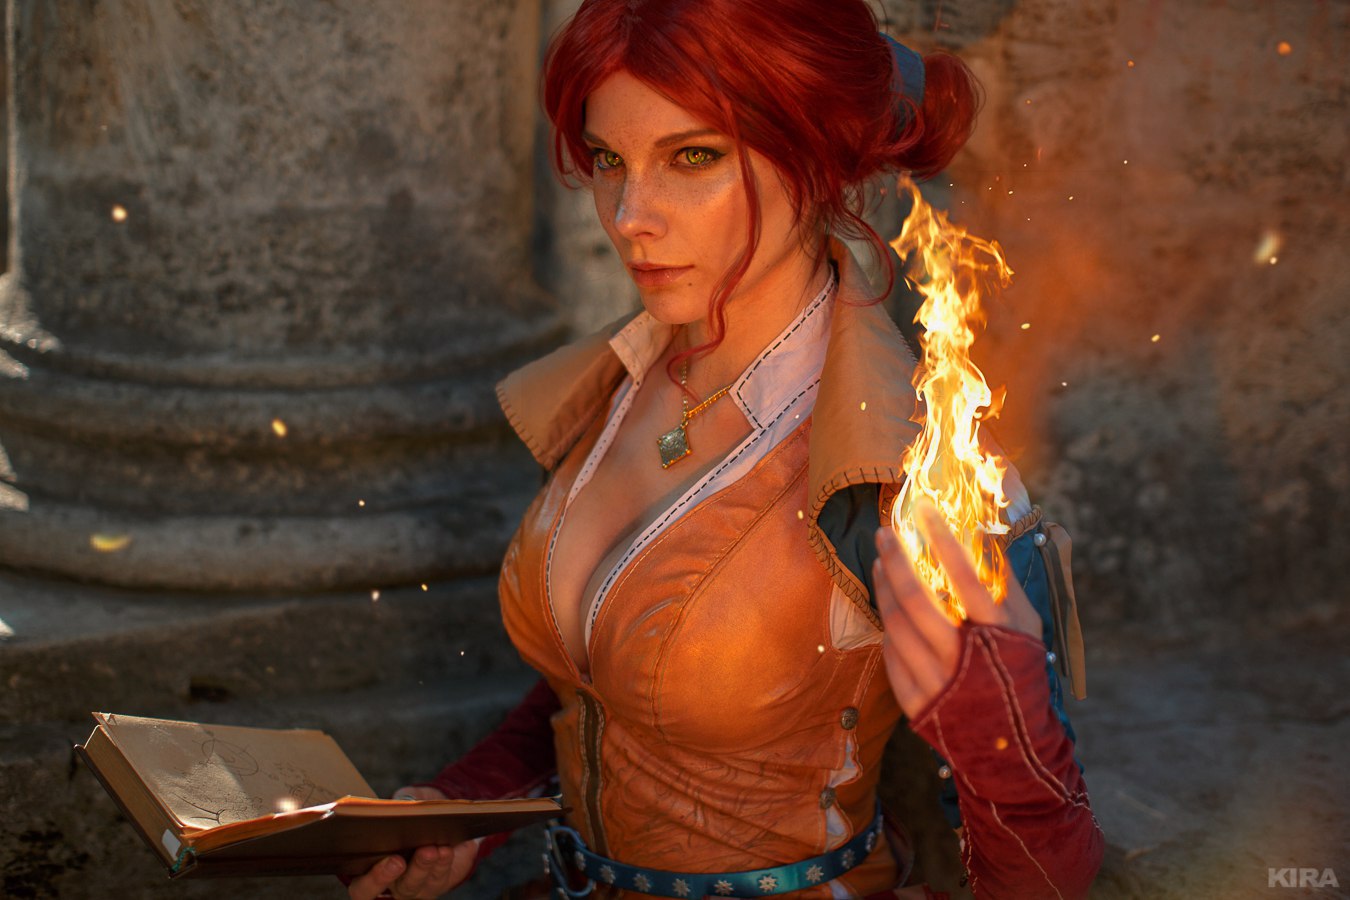 People 1350x900 cosplay video games women cleavage big boobs redhead Triss Merigold The Witcher The Witcher 3: Wild Hunt Gwent necklace fire sorceress